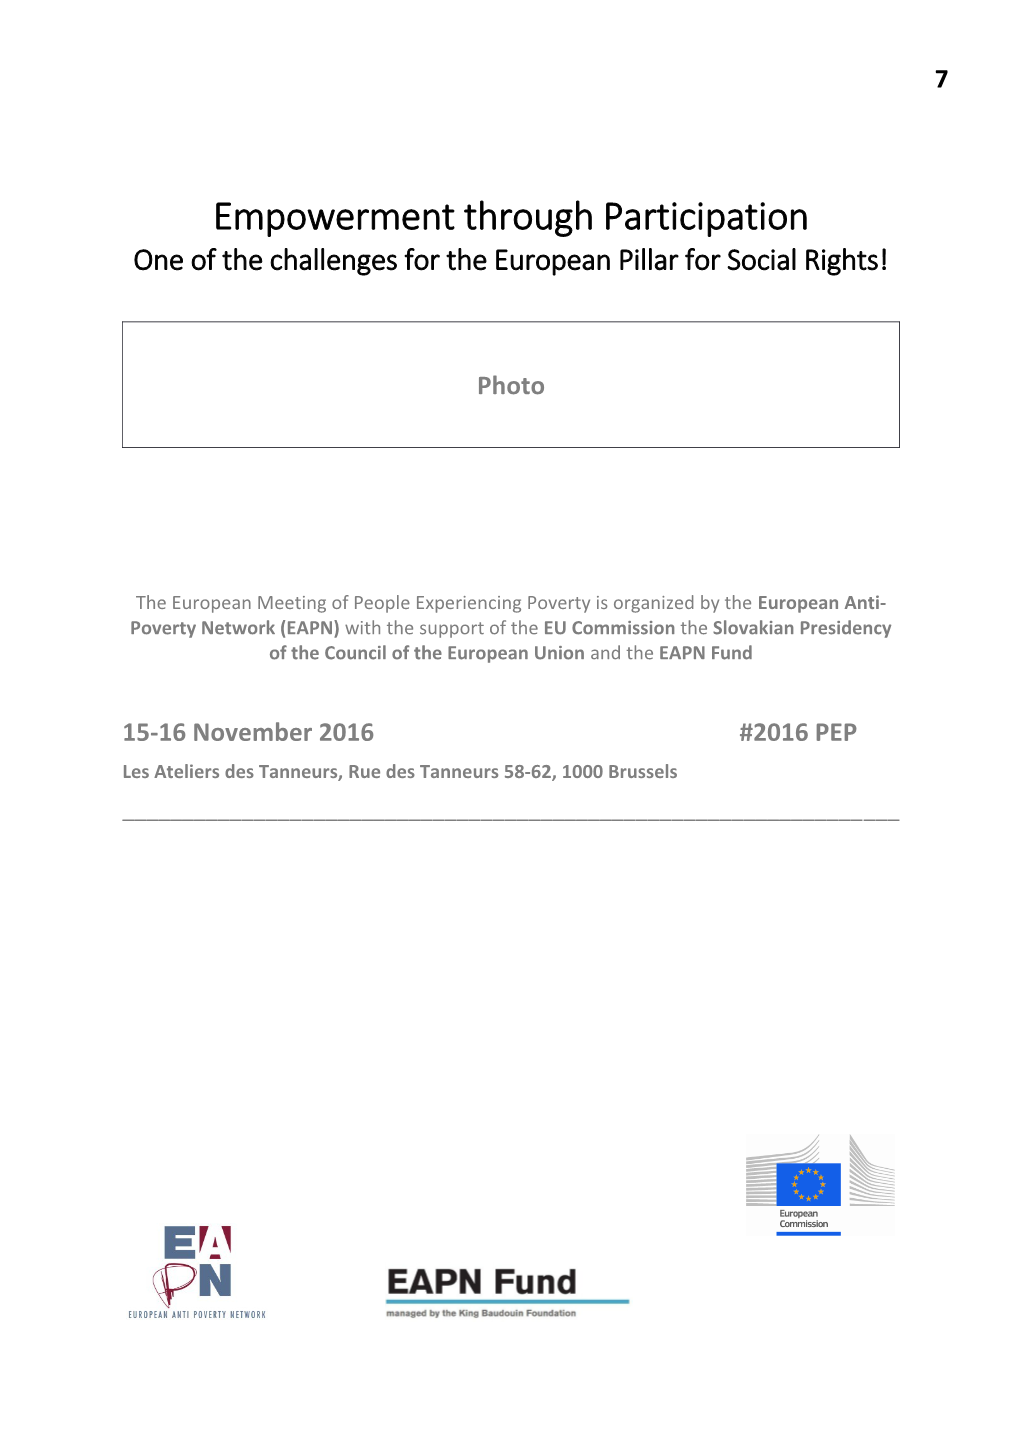 One of the Challenges for the European Pillar for Social Rights!